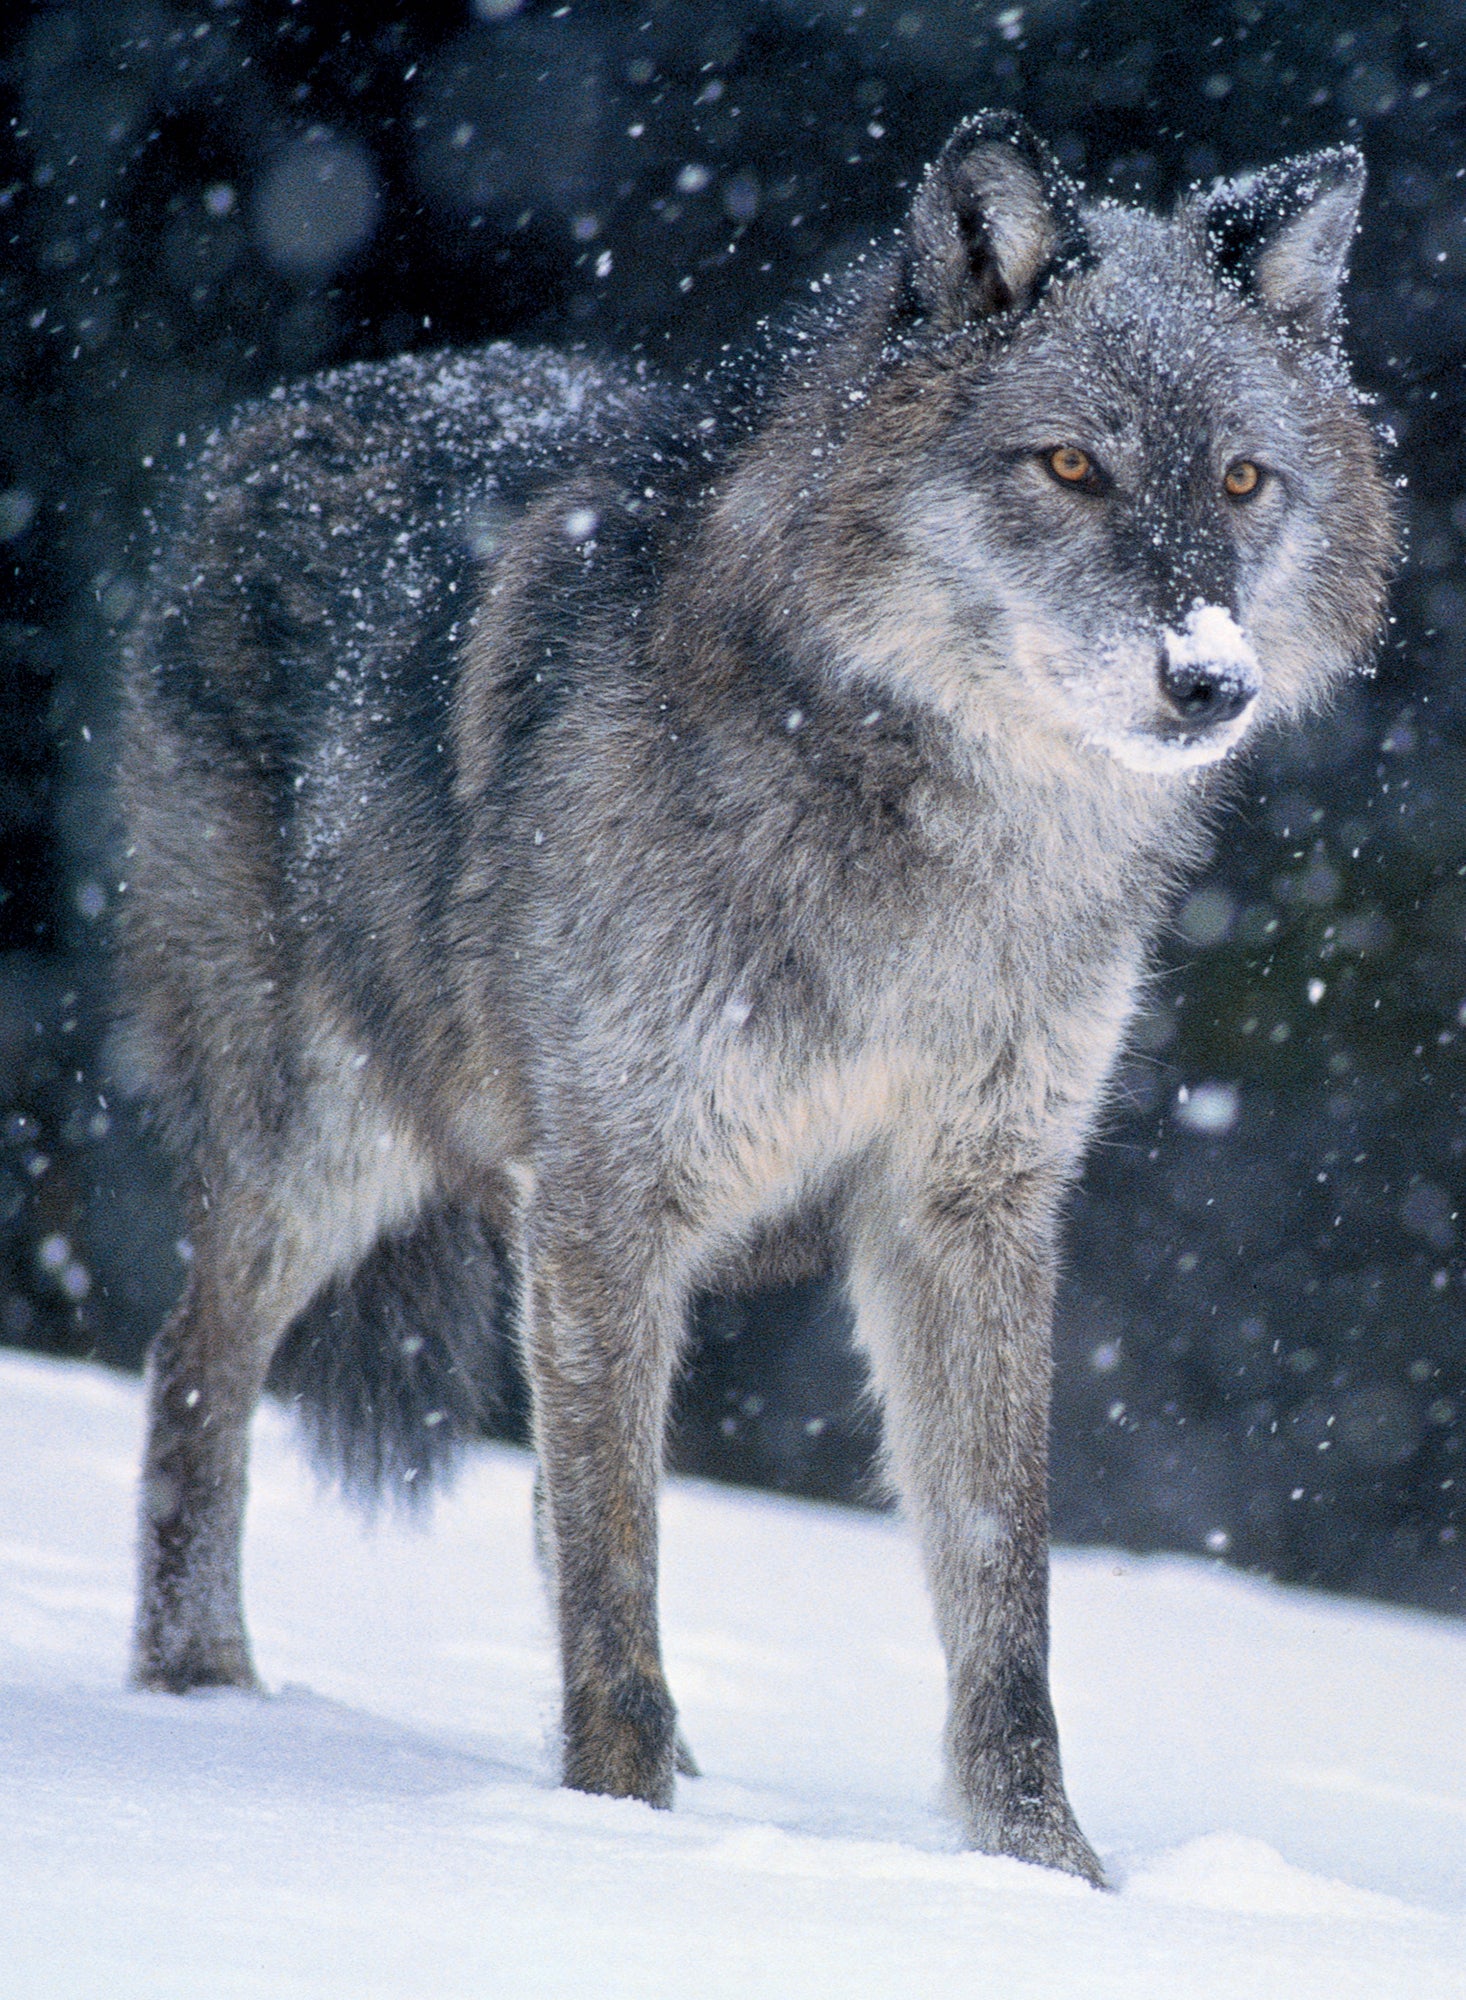 Close up portrait of a timber wolf standing in falling snow. End of image description.